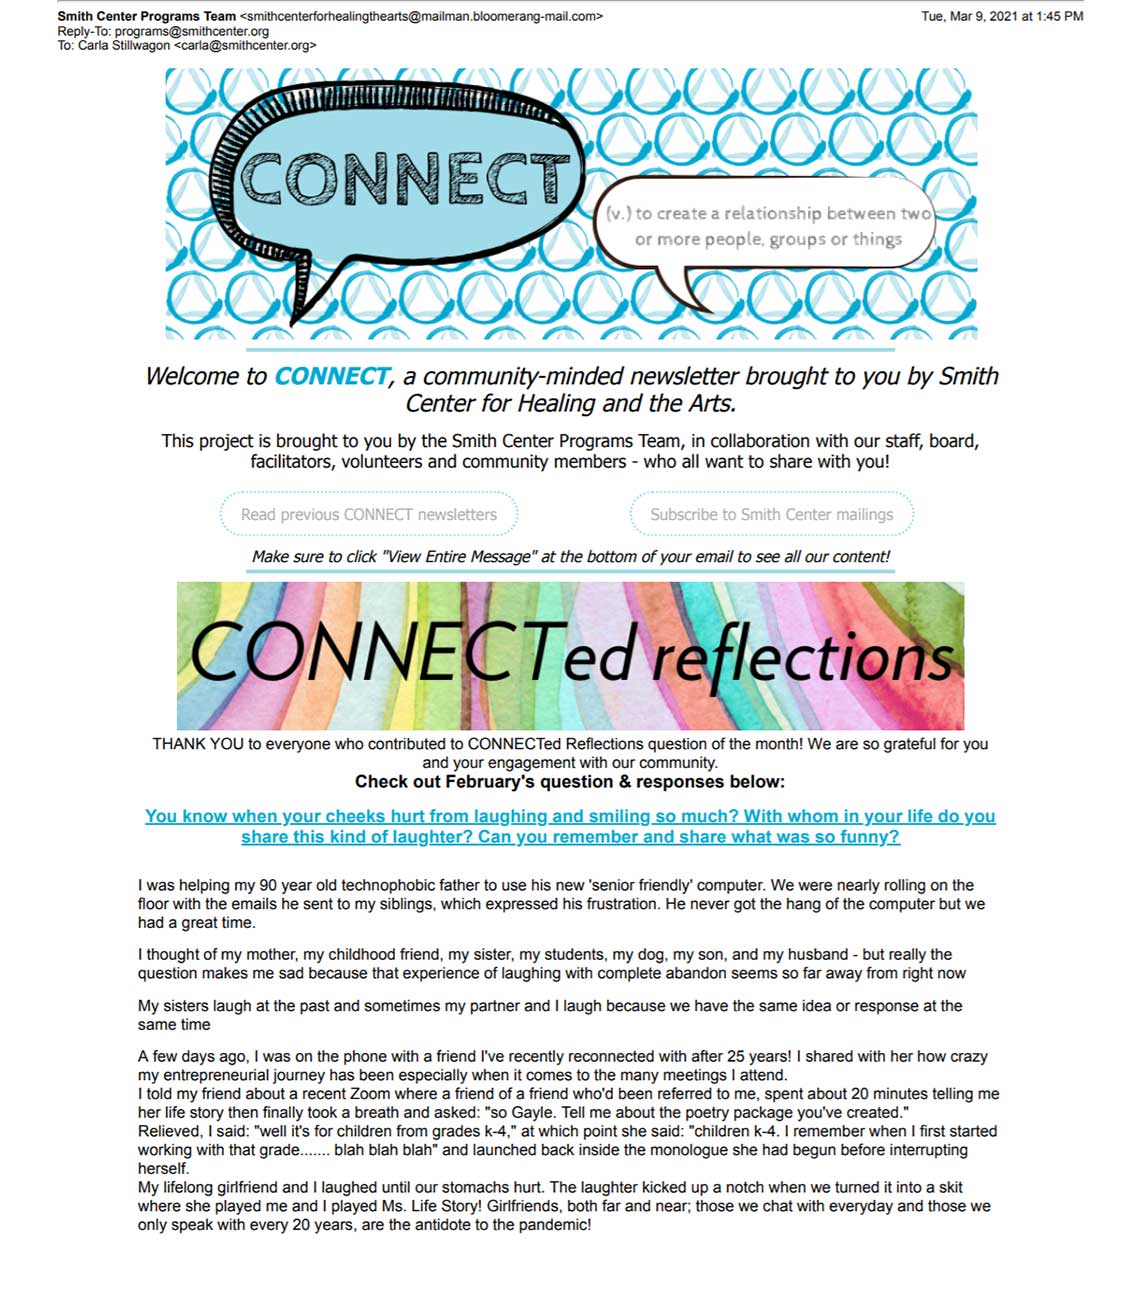 CONNECT Newsletter March 9, 2021